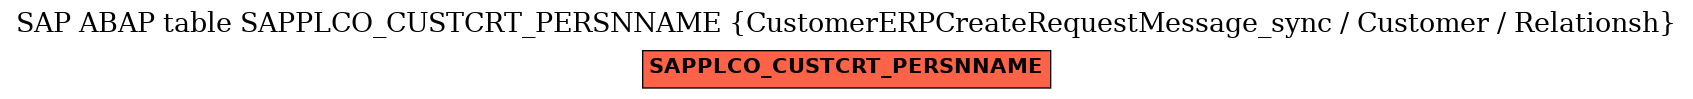 E-R Diagram for table SAPPLCO_CUSTCRT_PERSNNAME (CustomerERPCreateRequestMessage_sync / Customer / Relationsh)